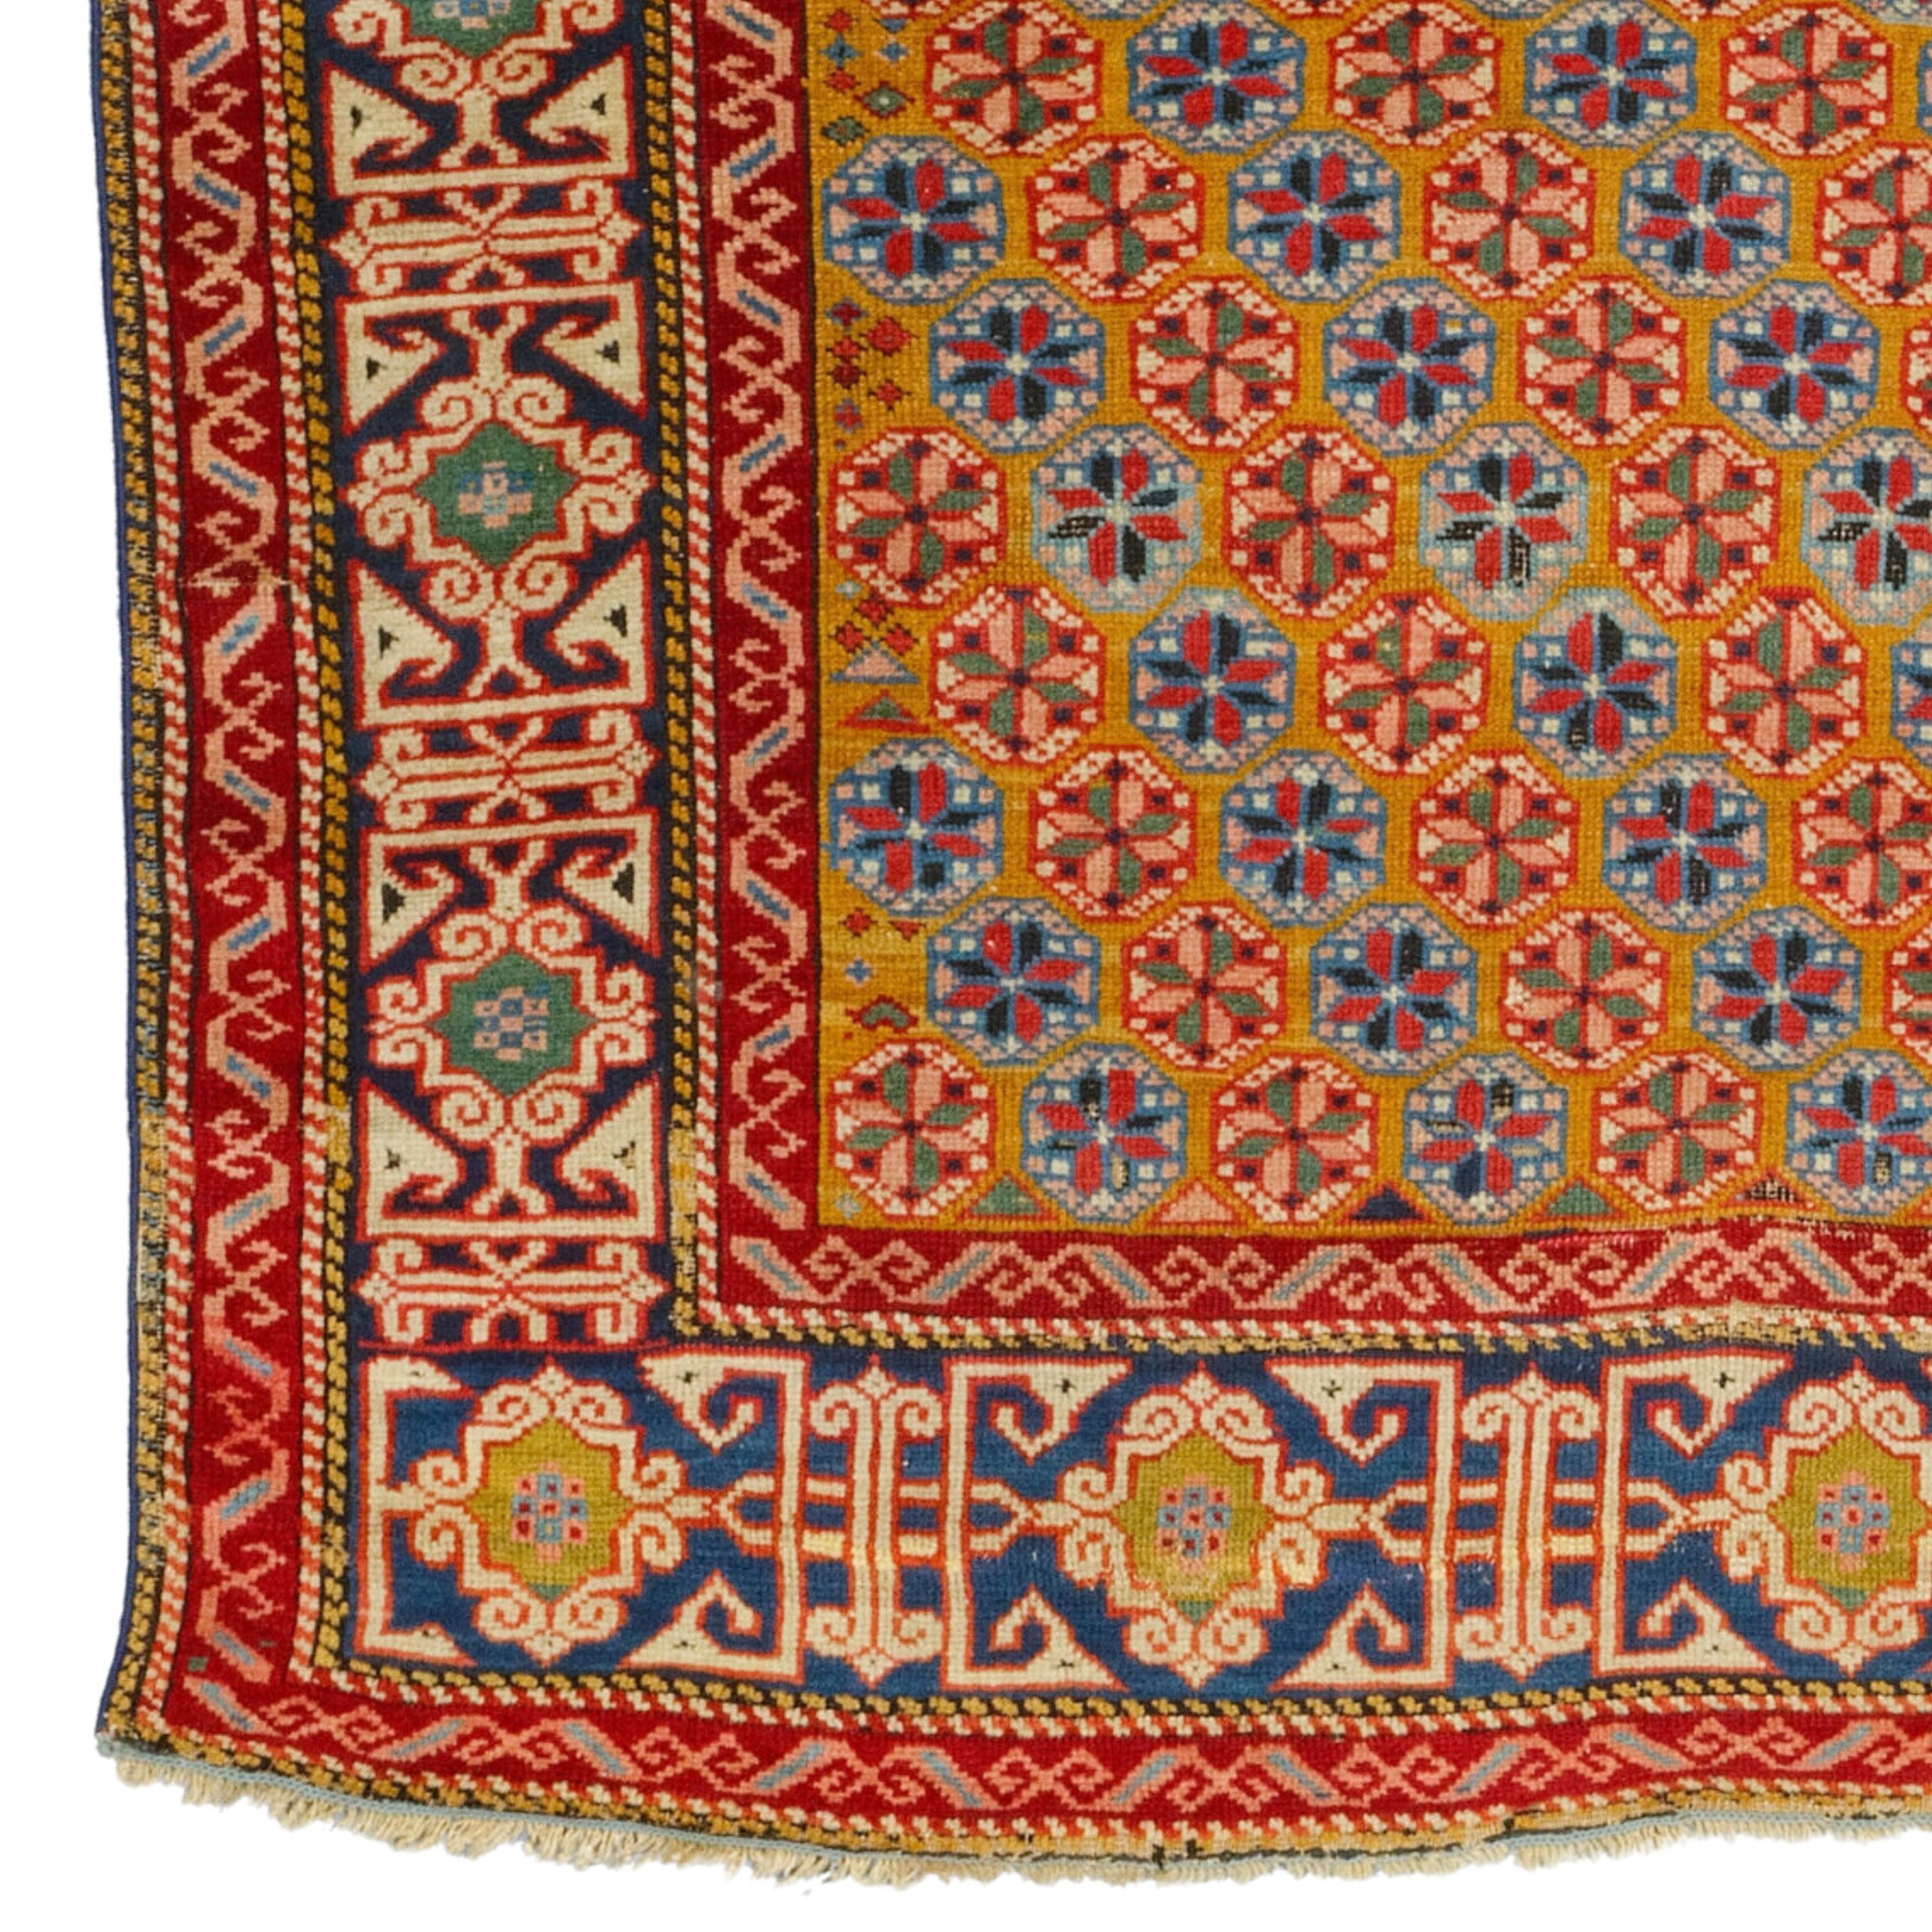 Middle Of The 19th Century Caucasian  Shirvan Rug
Size: 125 x 155 cm (4,1 - 5 ft)

Add Art and History to Your Home: 19th Century Caucasian Shirvan Rug

Would you like to add both art and history to the decoration of your home? Then don't miss this